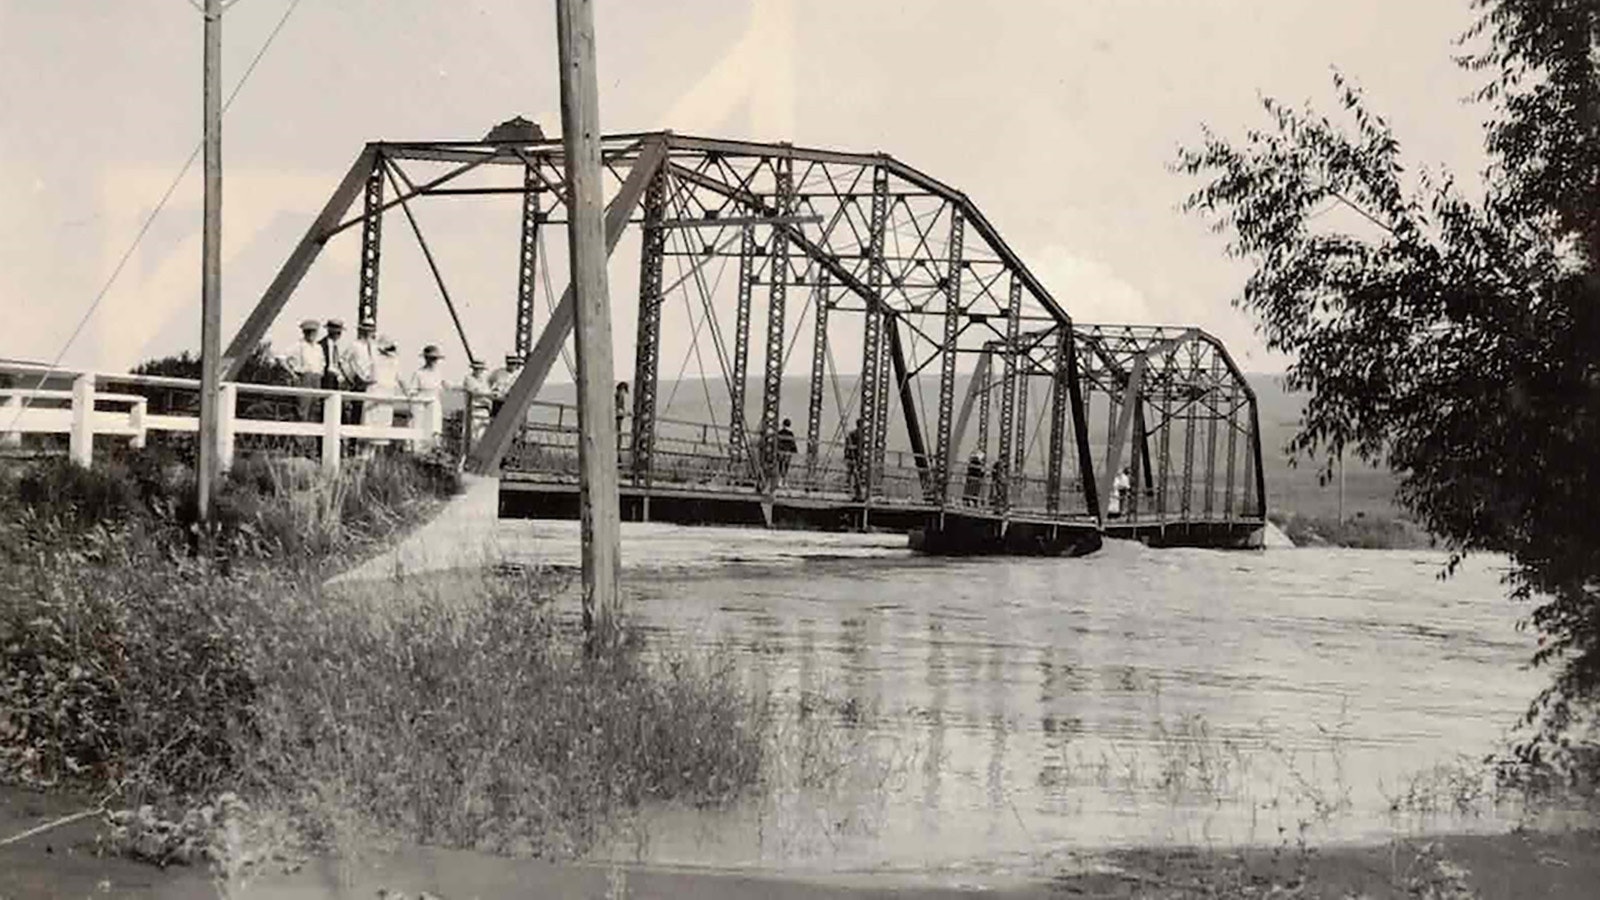 In July 1923, the Bighorn River Basin became filled with water through torrential rains. Here Thermopolis residents stand on a bridge as the waters rise on July 24, 1923.